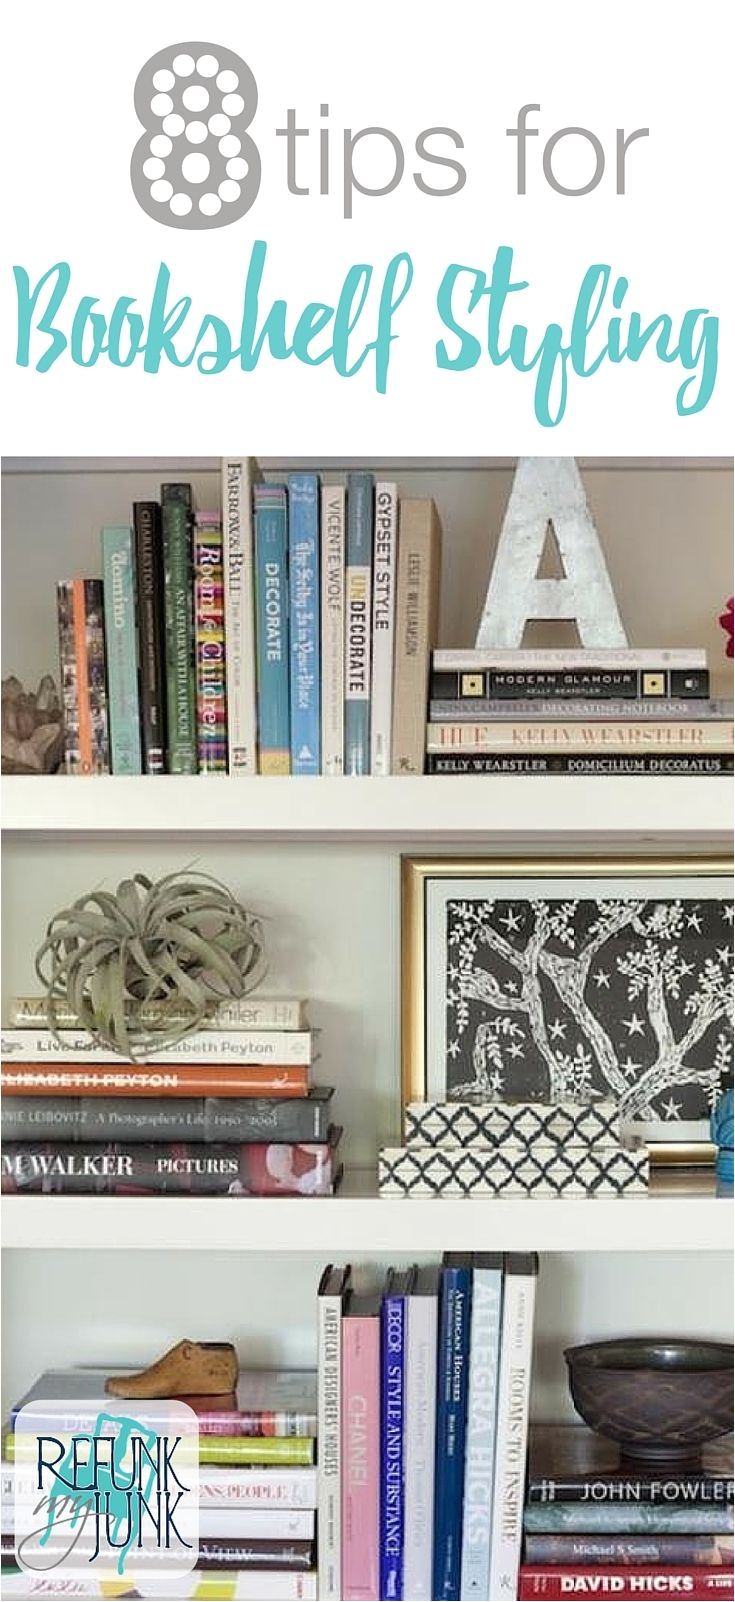 8 tips for bookshelf styling decorating a bookshelf can be overwhelming here are some simple bookshelf styling guidelines refunk my junk